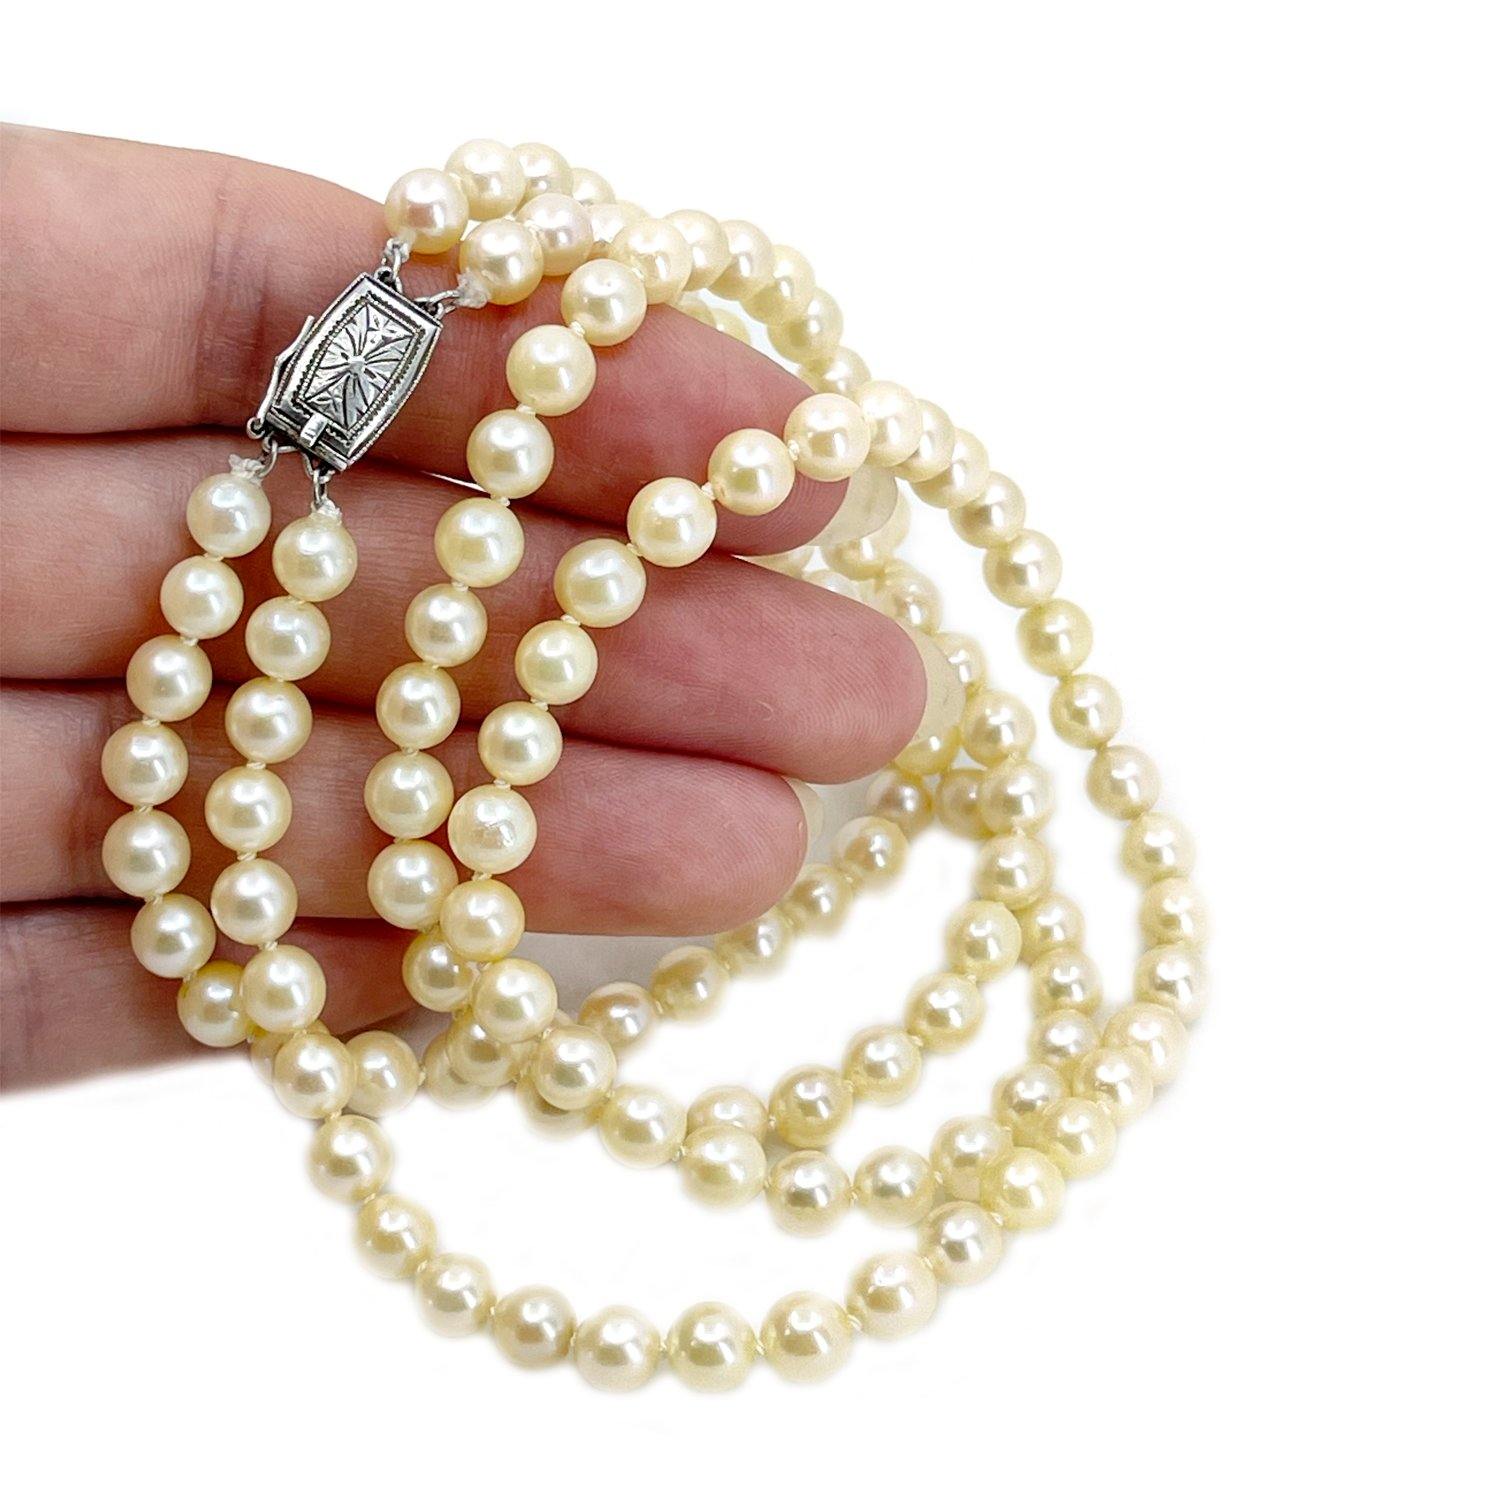 10mm Faux Pearl Necklace 16 Inch - Kezef Creations